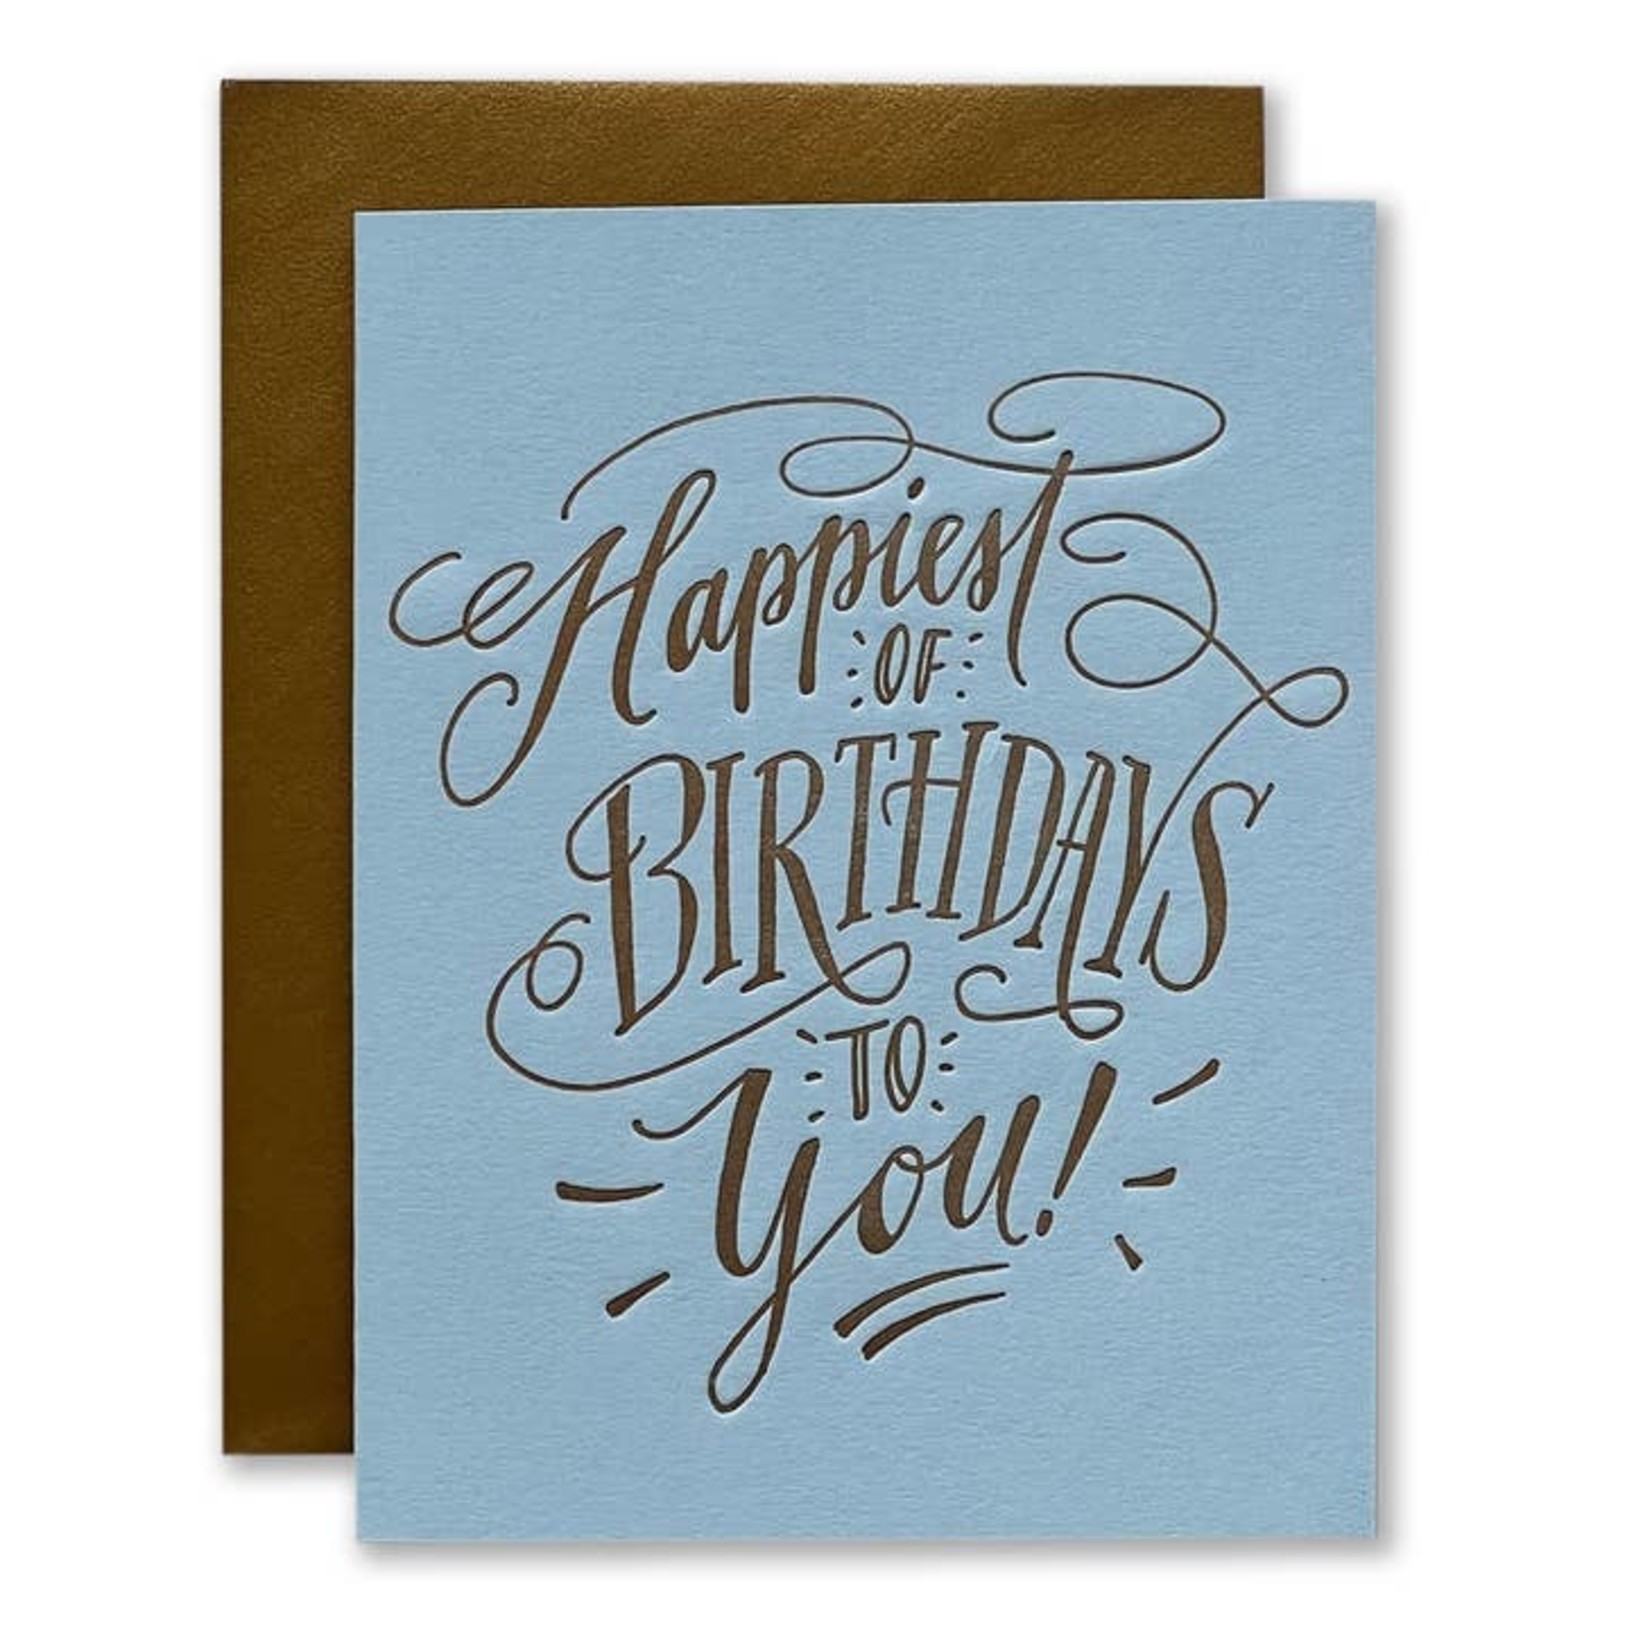 Greeting Cards - Birthday Happiest Of Birthdays To You